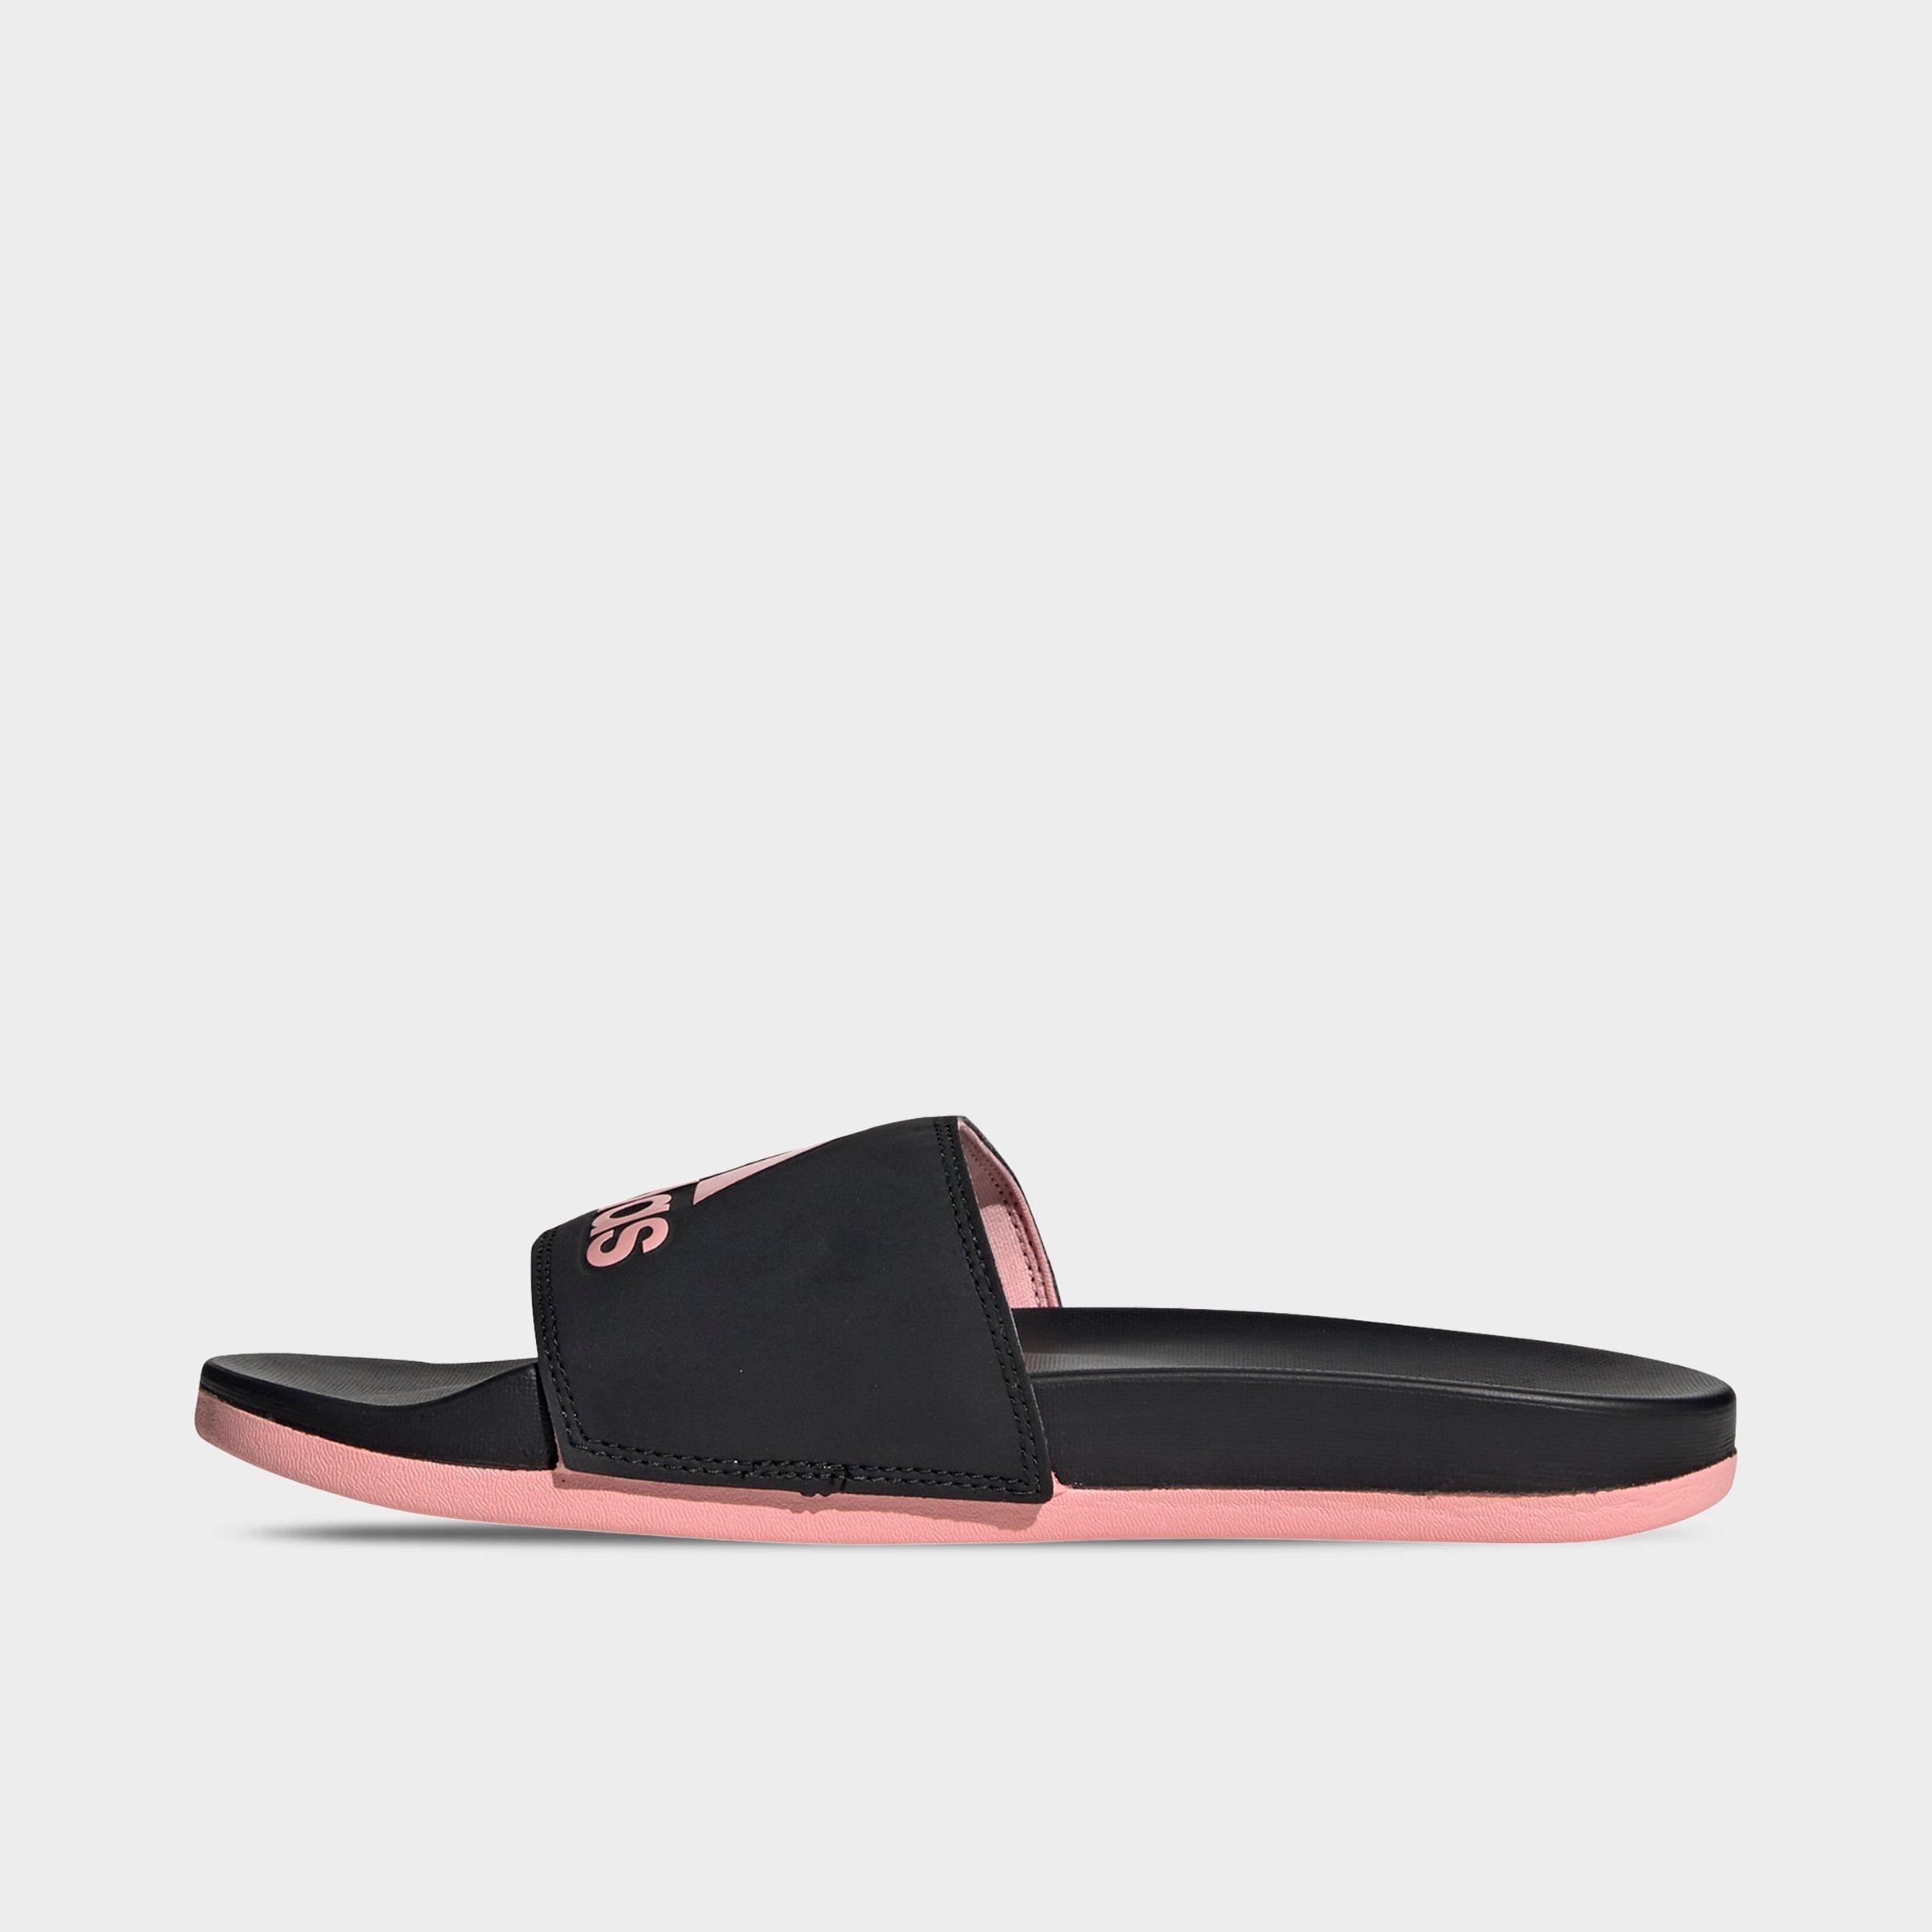 nike sandals with straps on the back